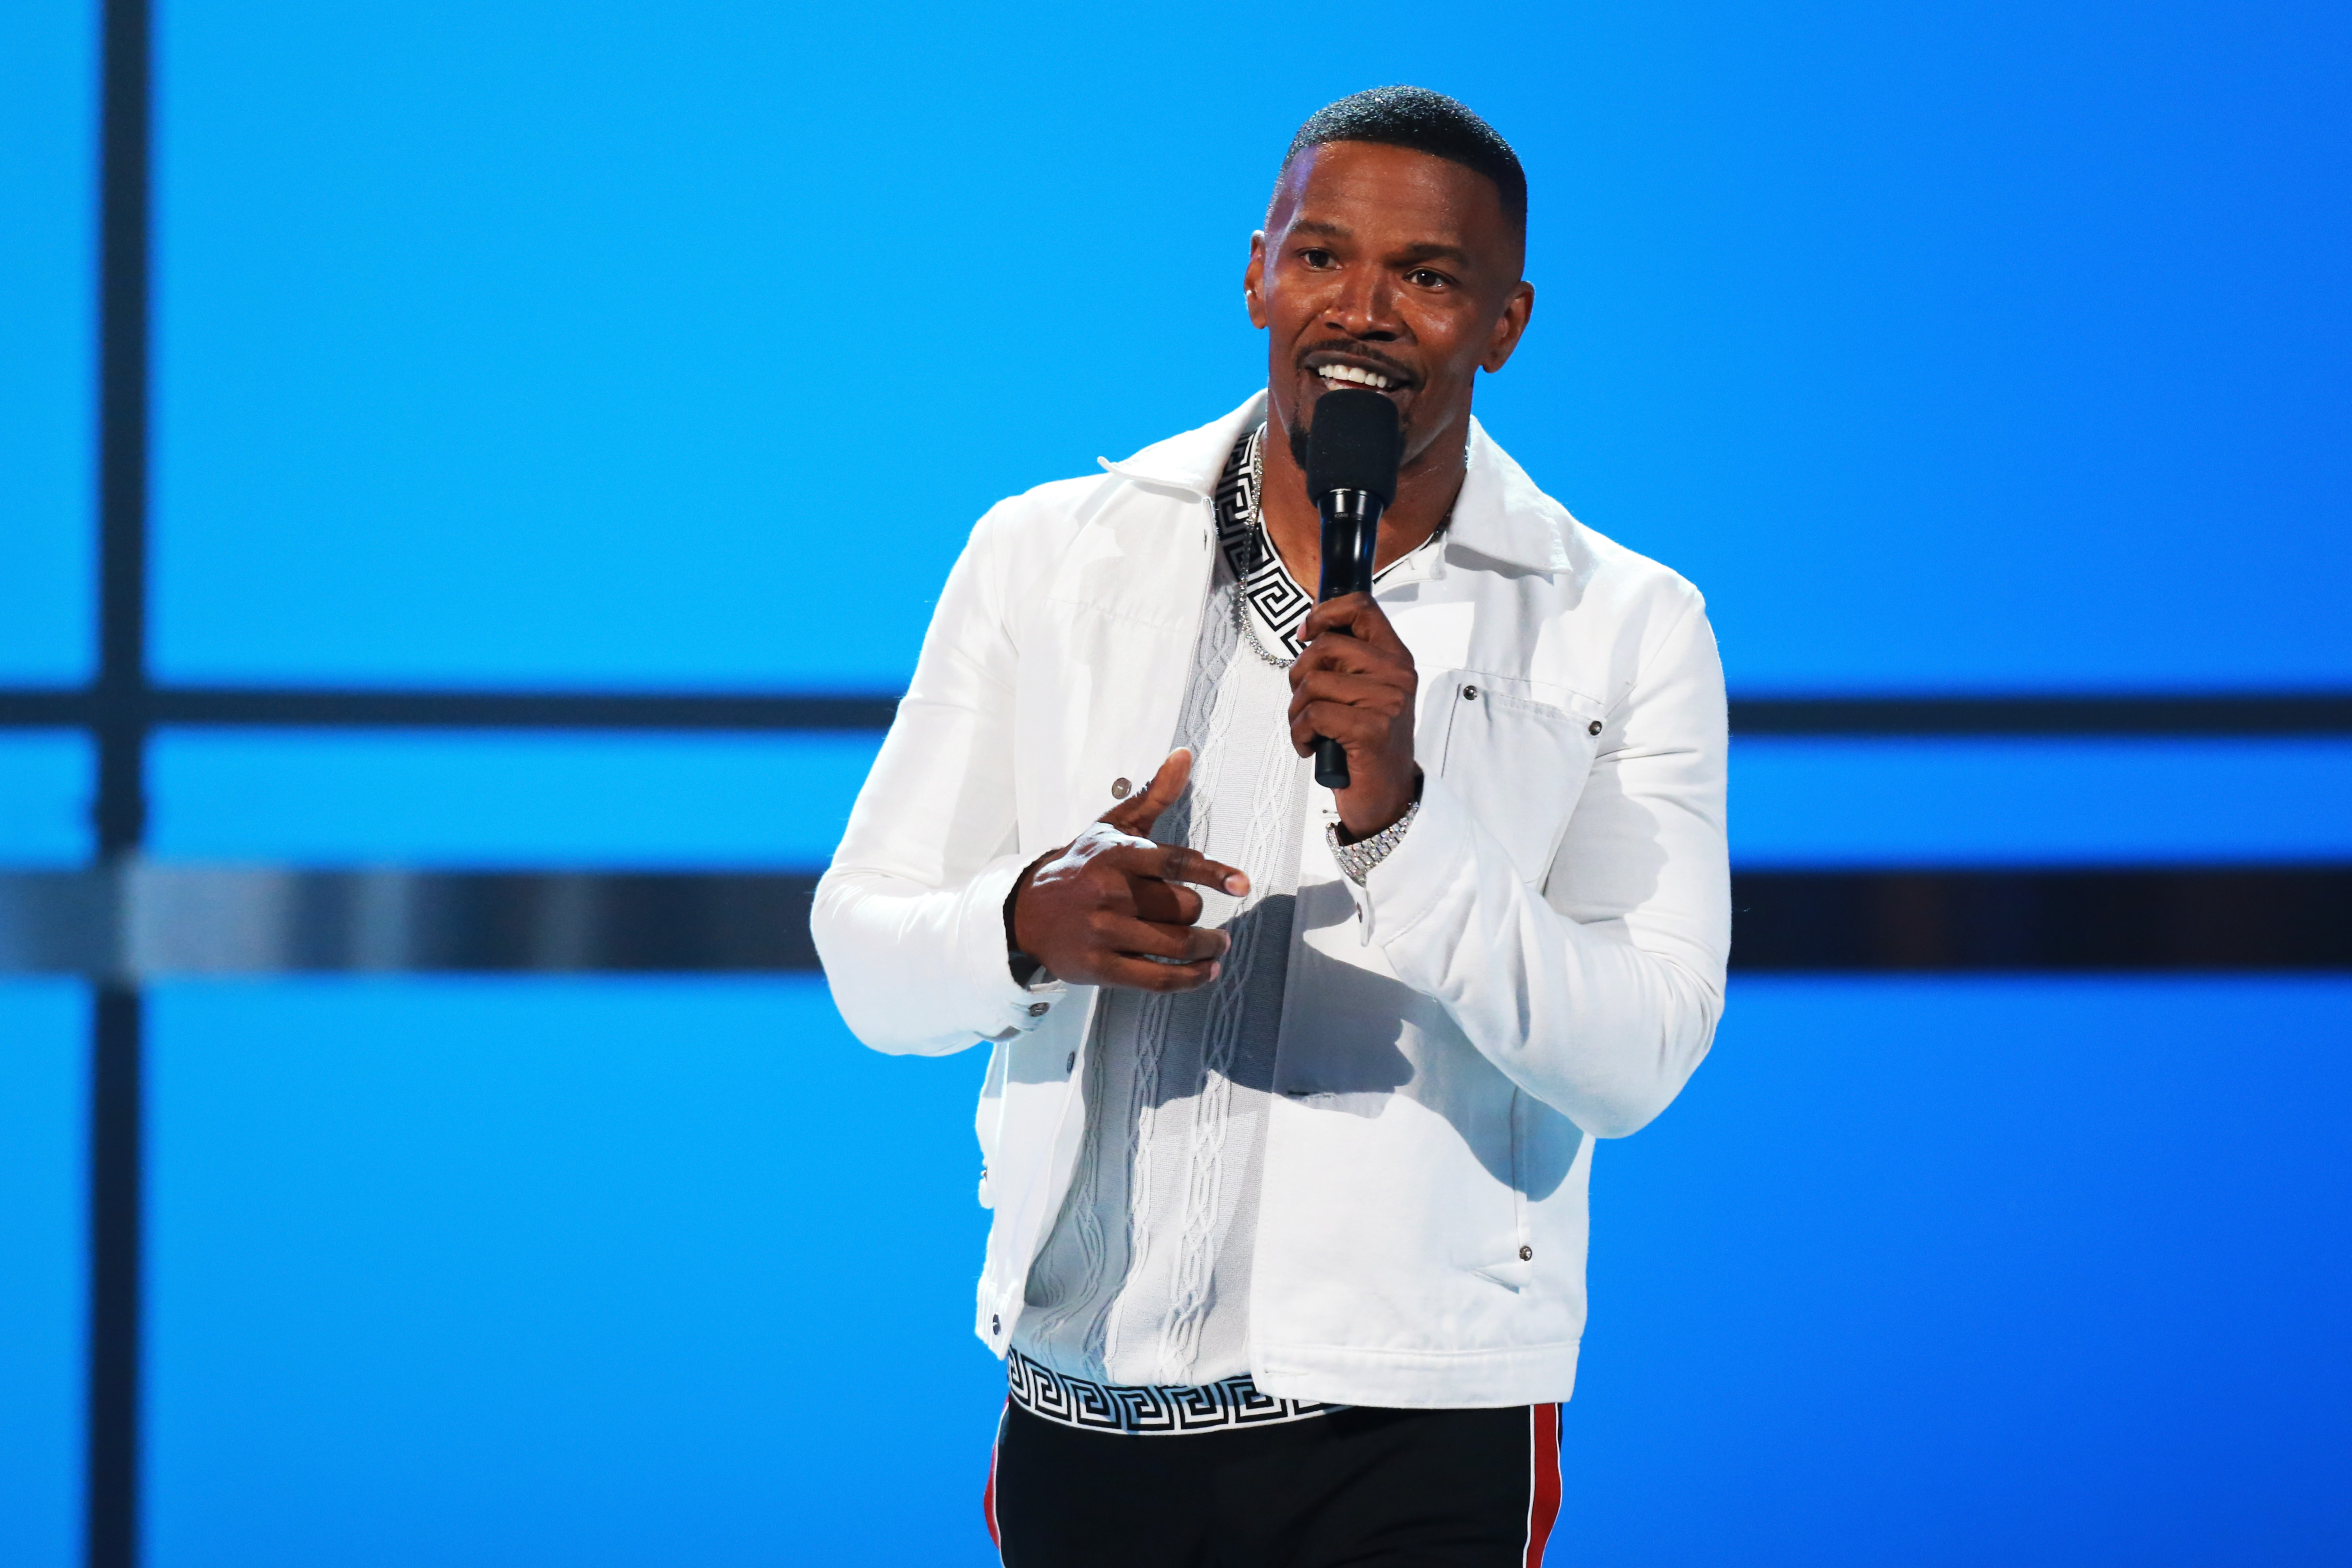 Host Jamie Foxx speaks onstage at the 2018 BET Awards at Microsoft Theater in Los Angeles, California on June 24, 2018. ((Photo by Leon Bennett/Getty Images))